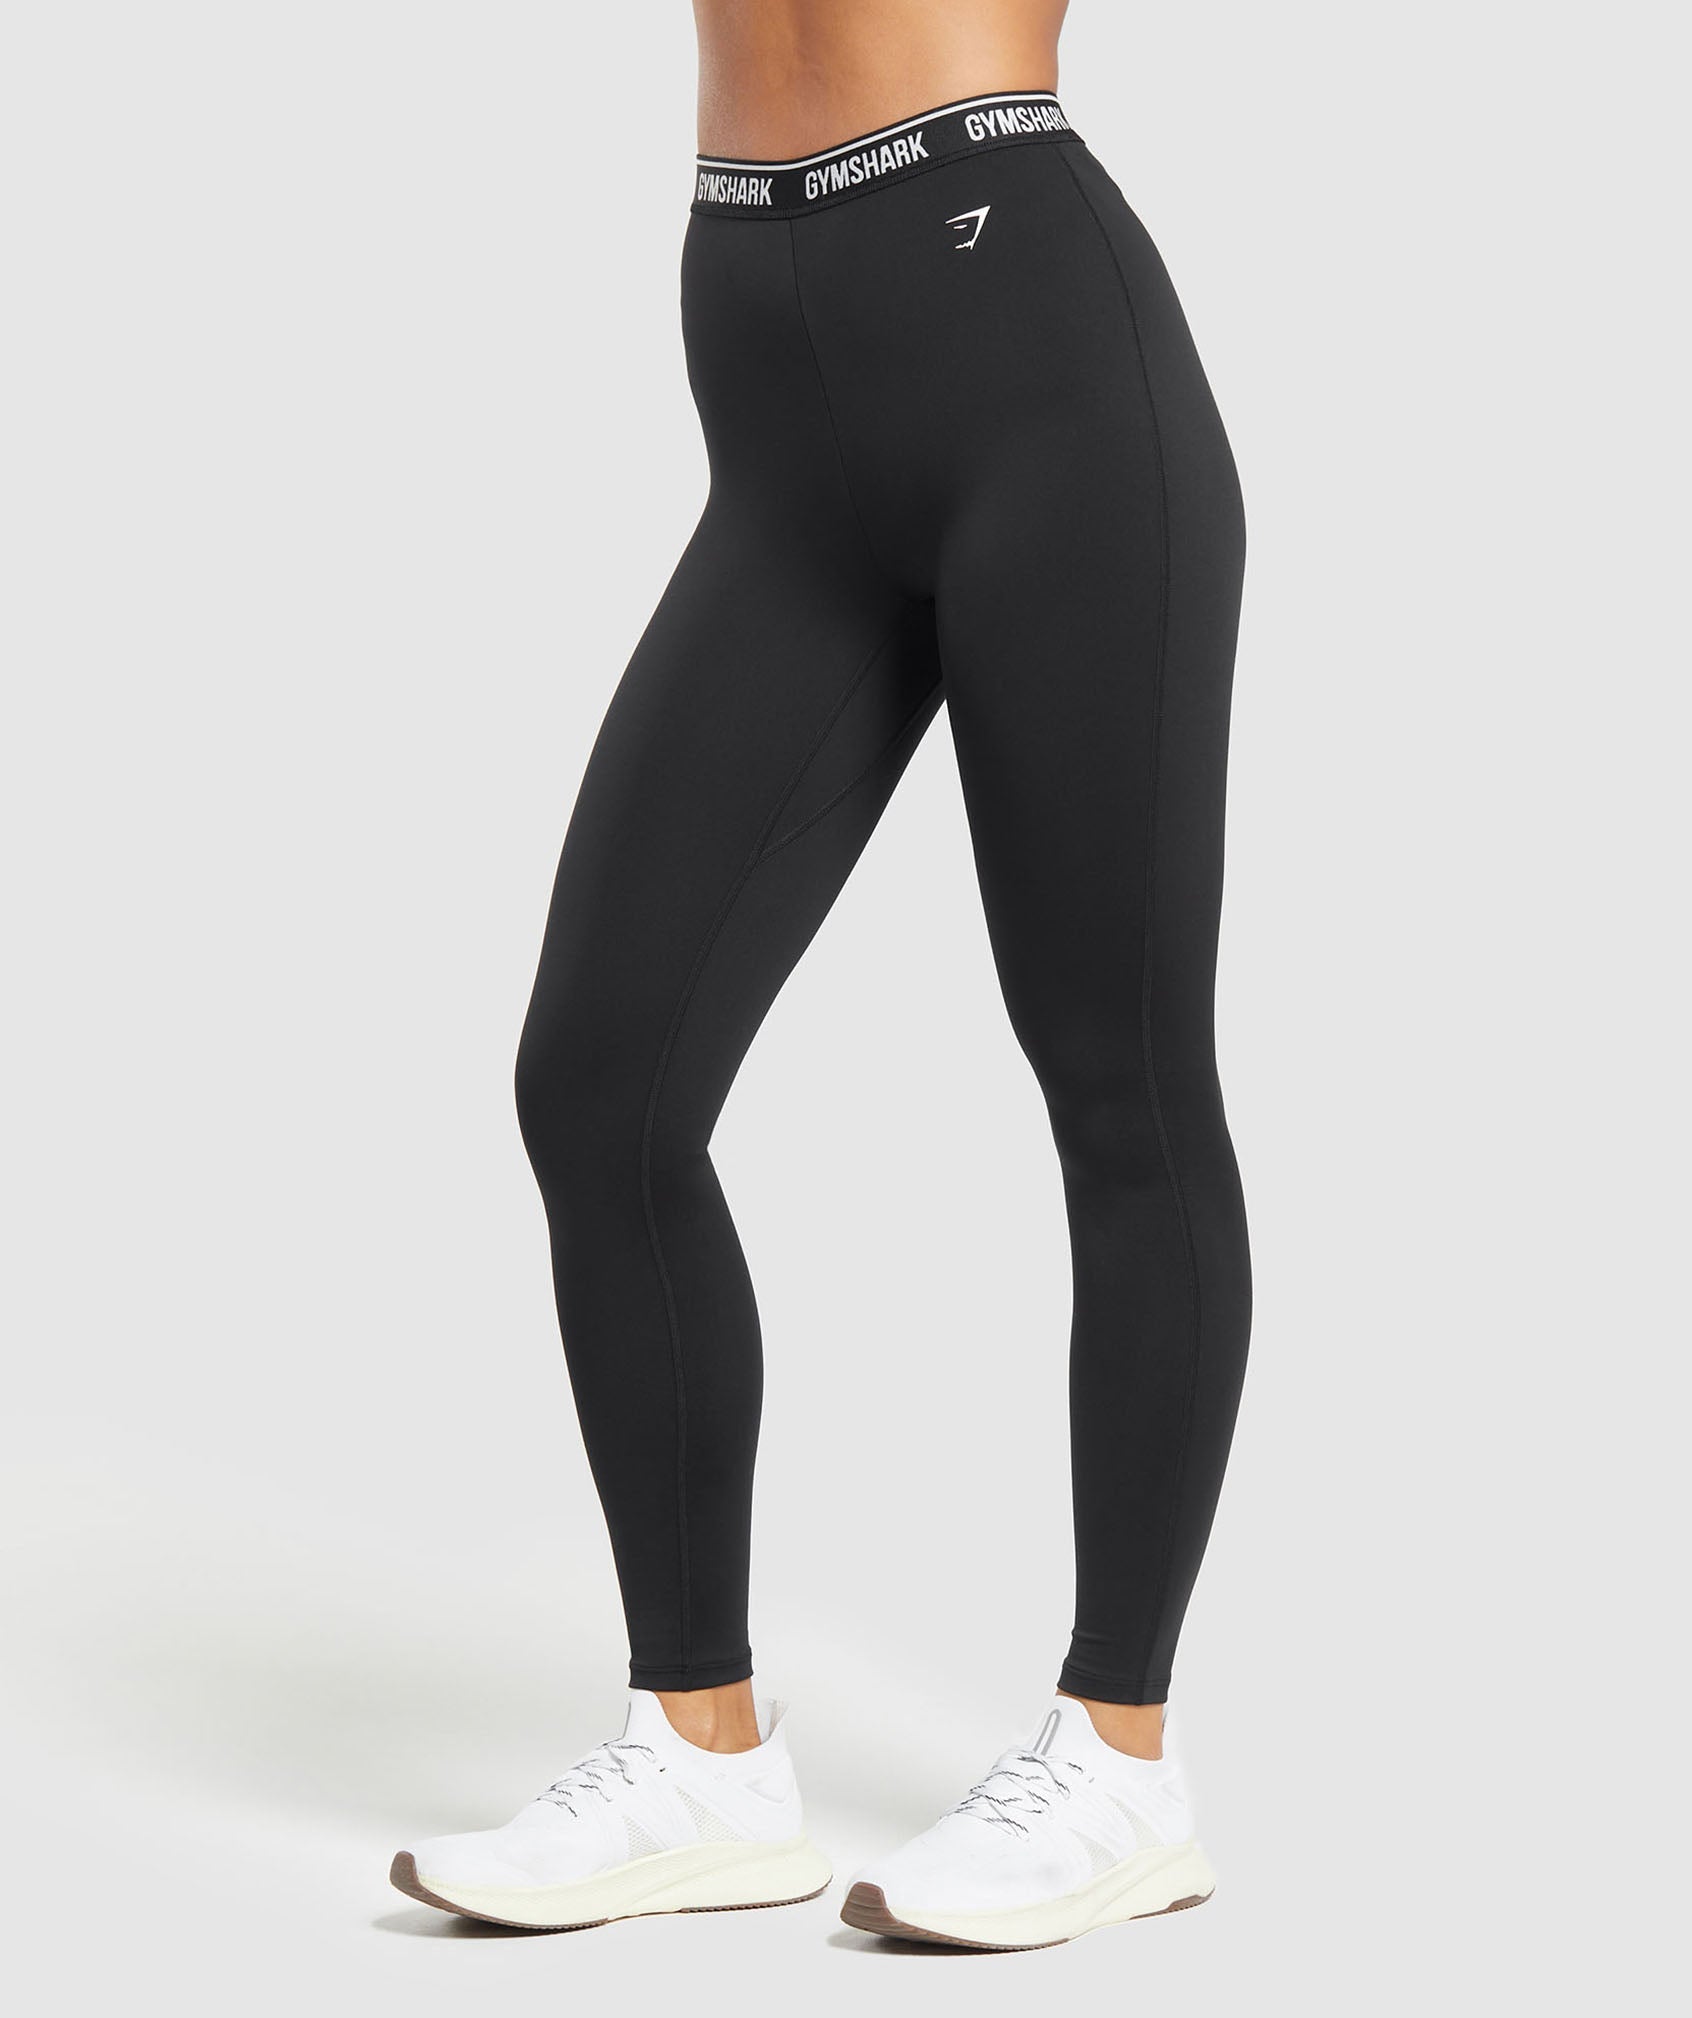 Everyday Waistband Leggings in Black - view 6